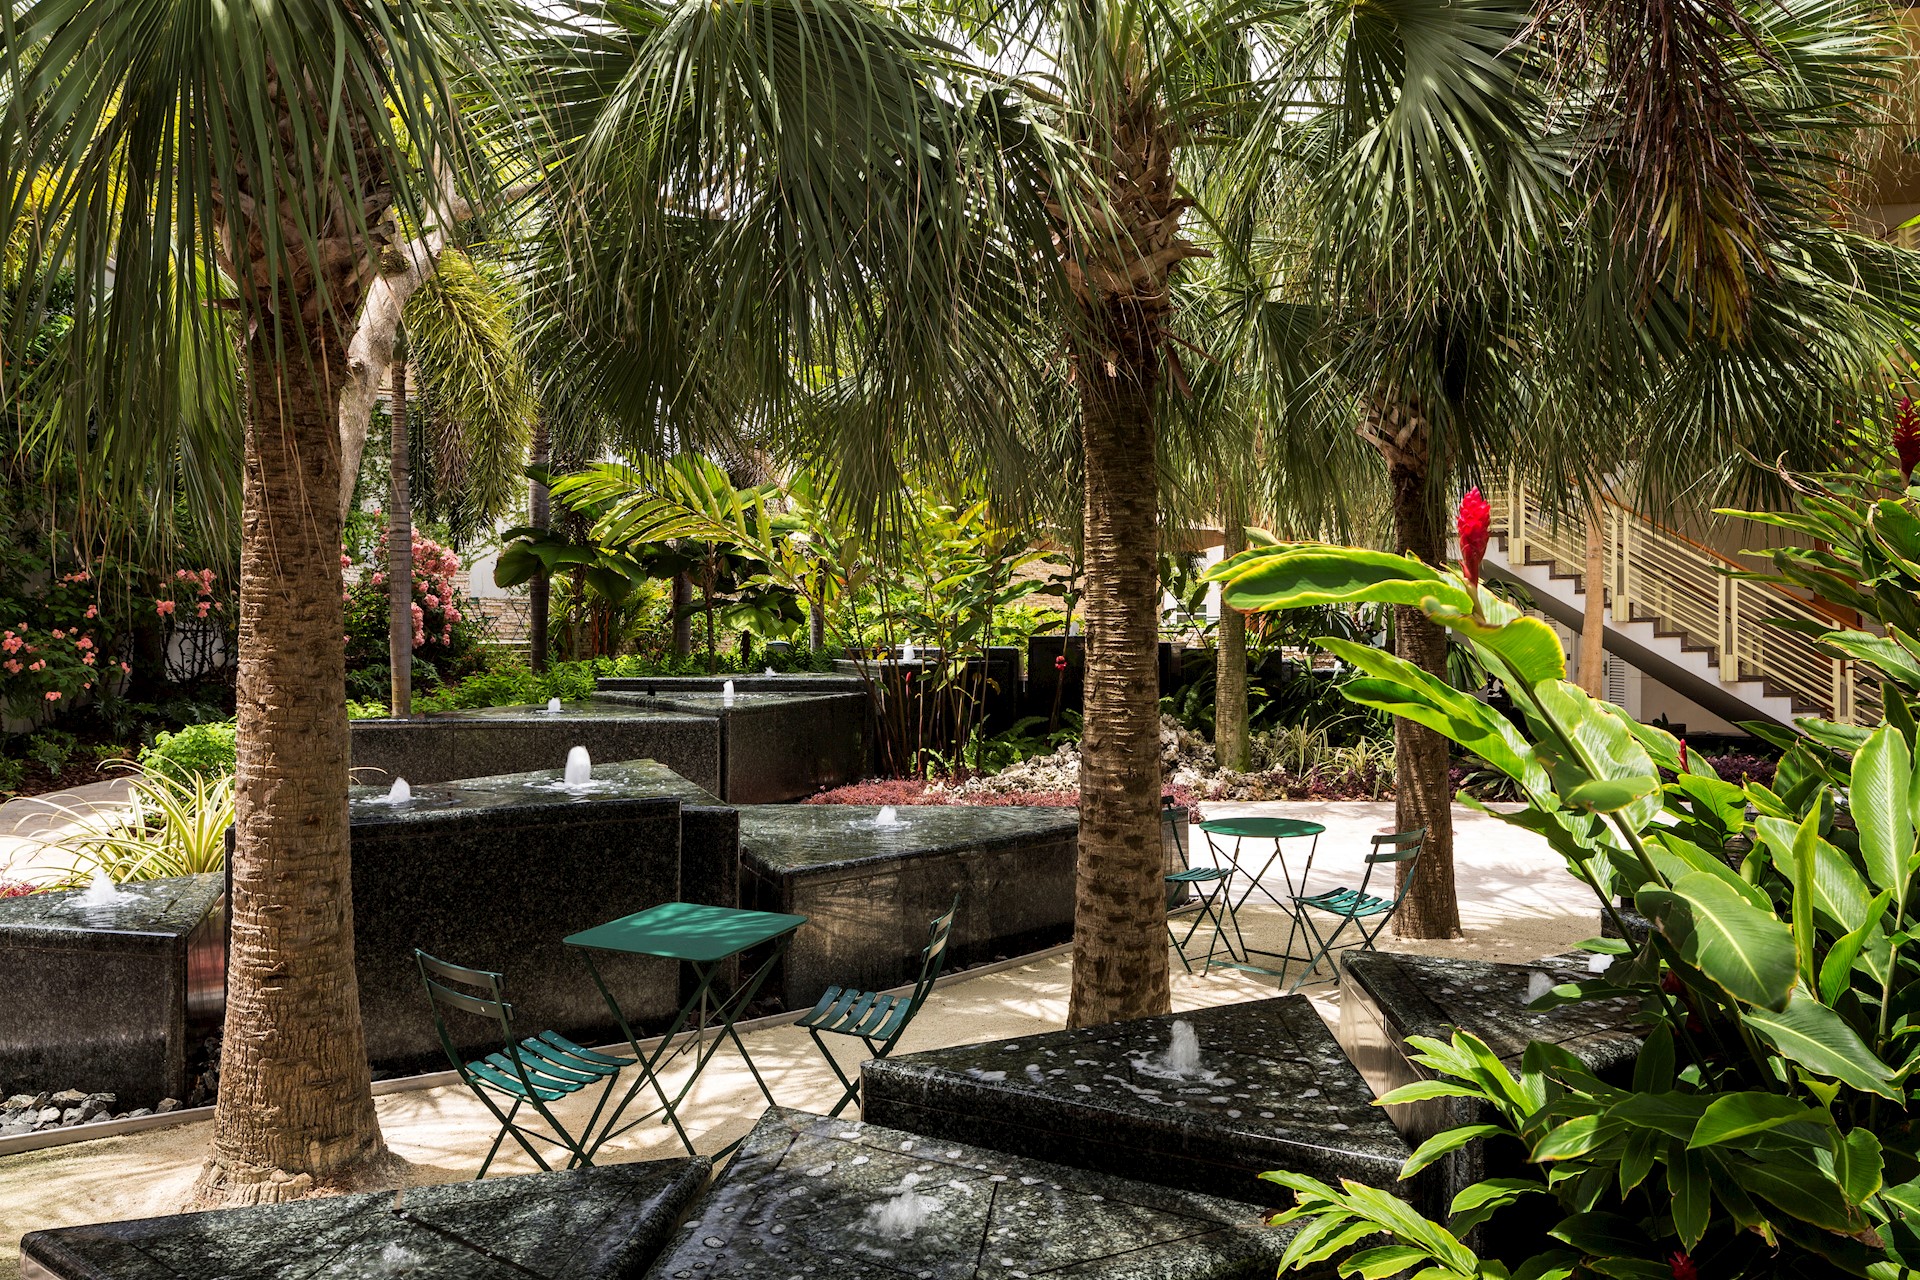 shaded-courtyard-with-palm-trees-fountains-and-benches